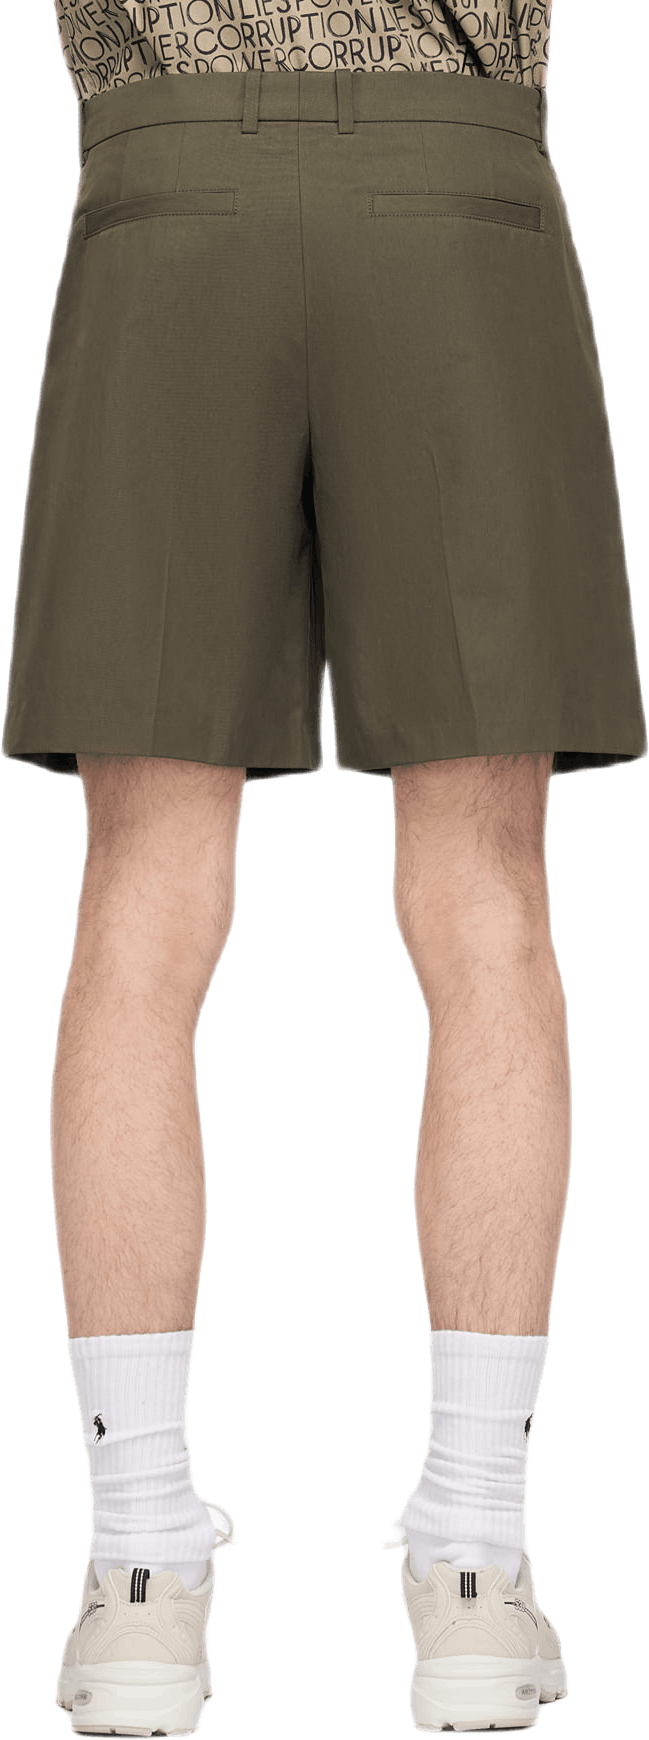 Terry Shorts Green